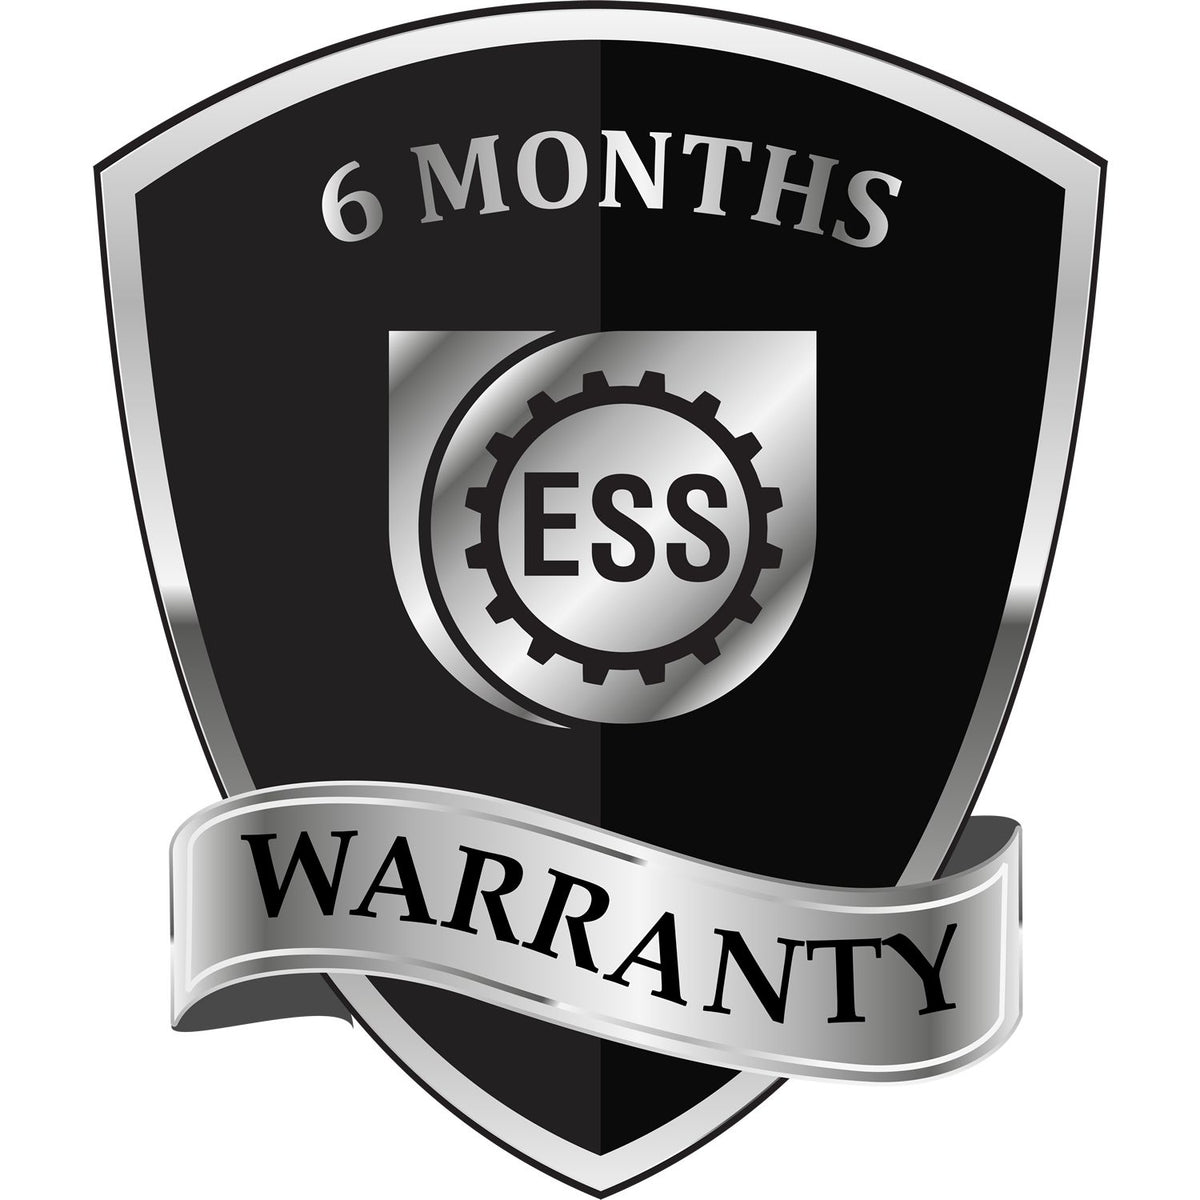 Narrow Past Due Rubber Stamp 4417R 6 Month Warranty